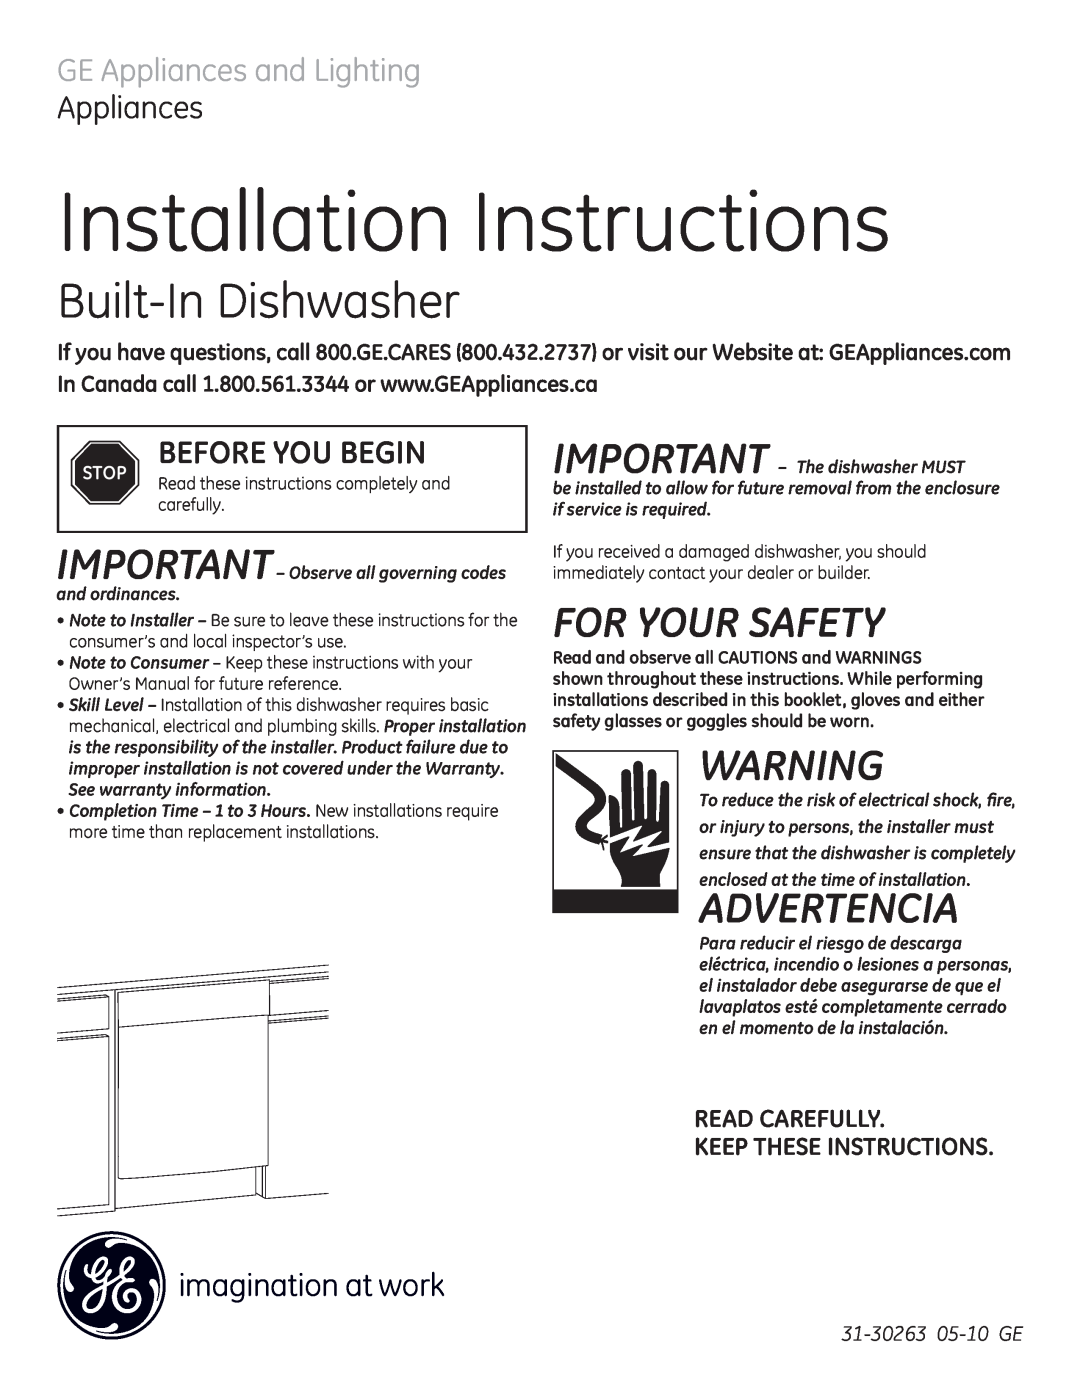 GE GE 31-30263 05-10 installation instructions Installation Instructions, Built-InDishwasher, For Your Safety, Advertencia 